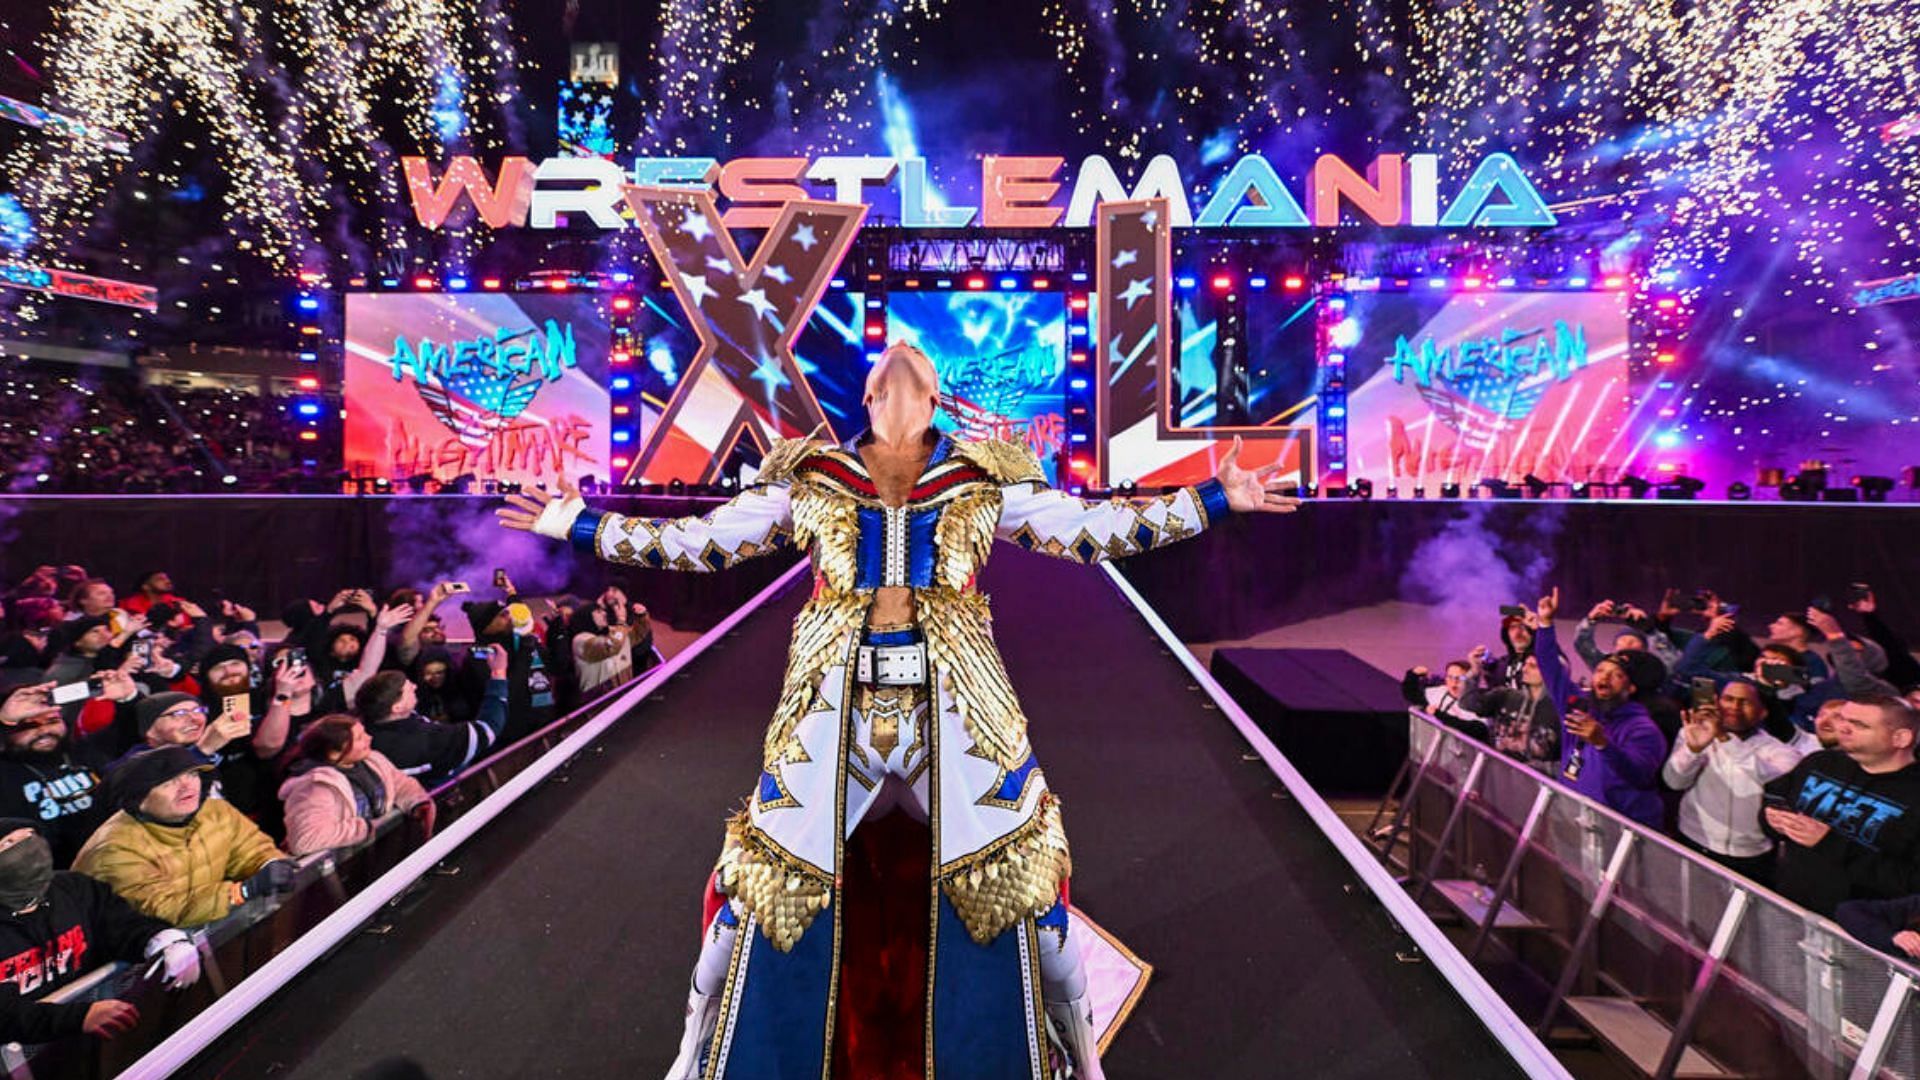 Rhodes finished his story last night at WrestleMania.